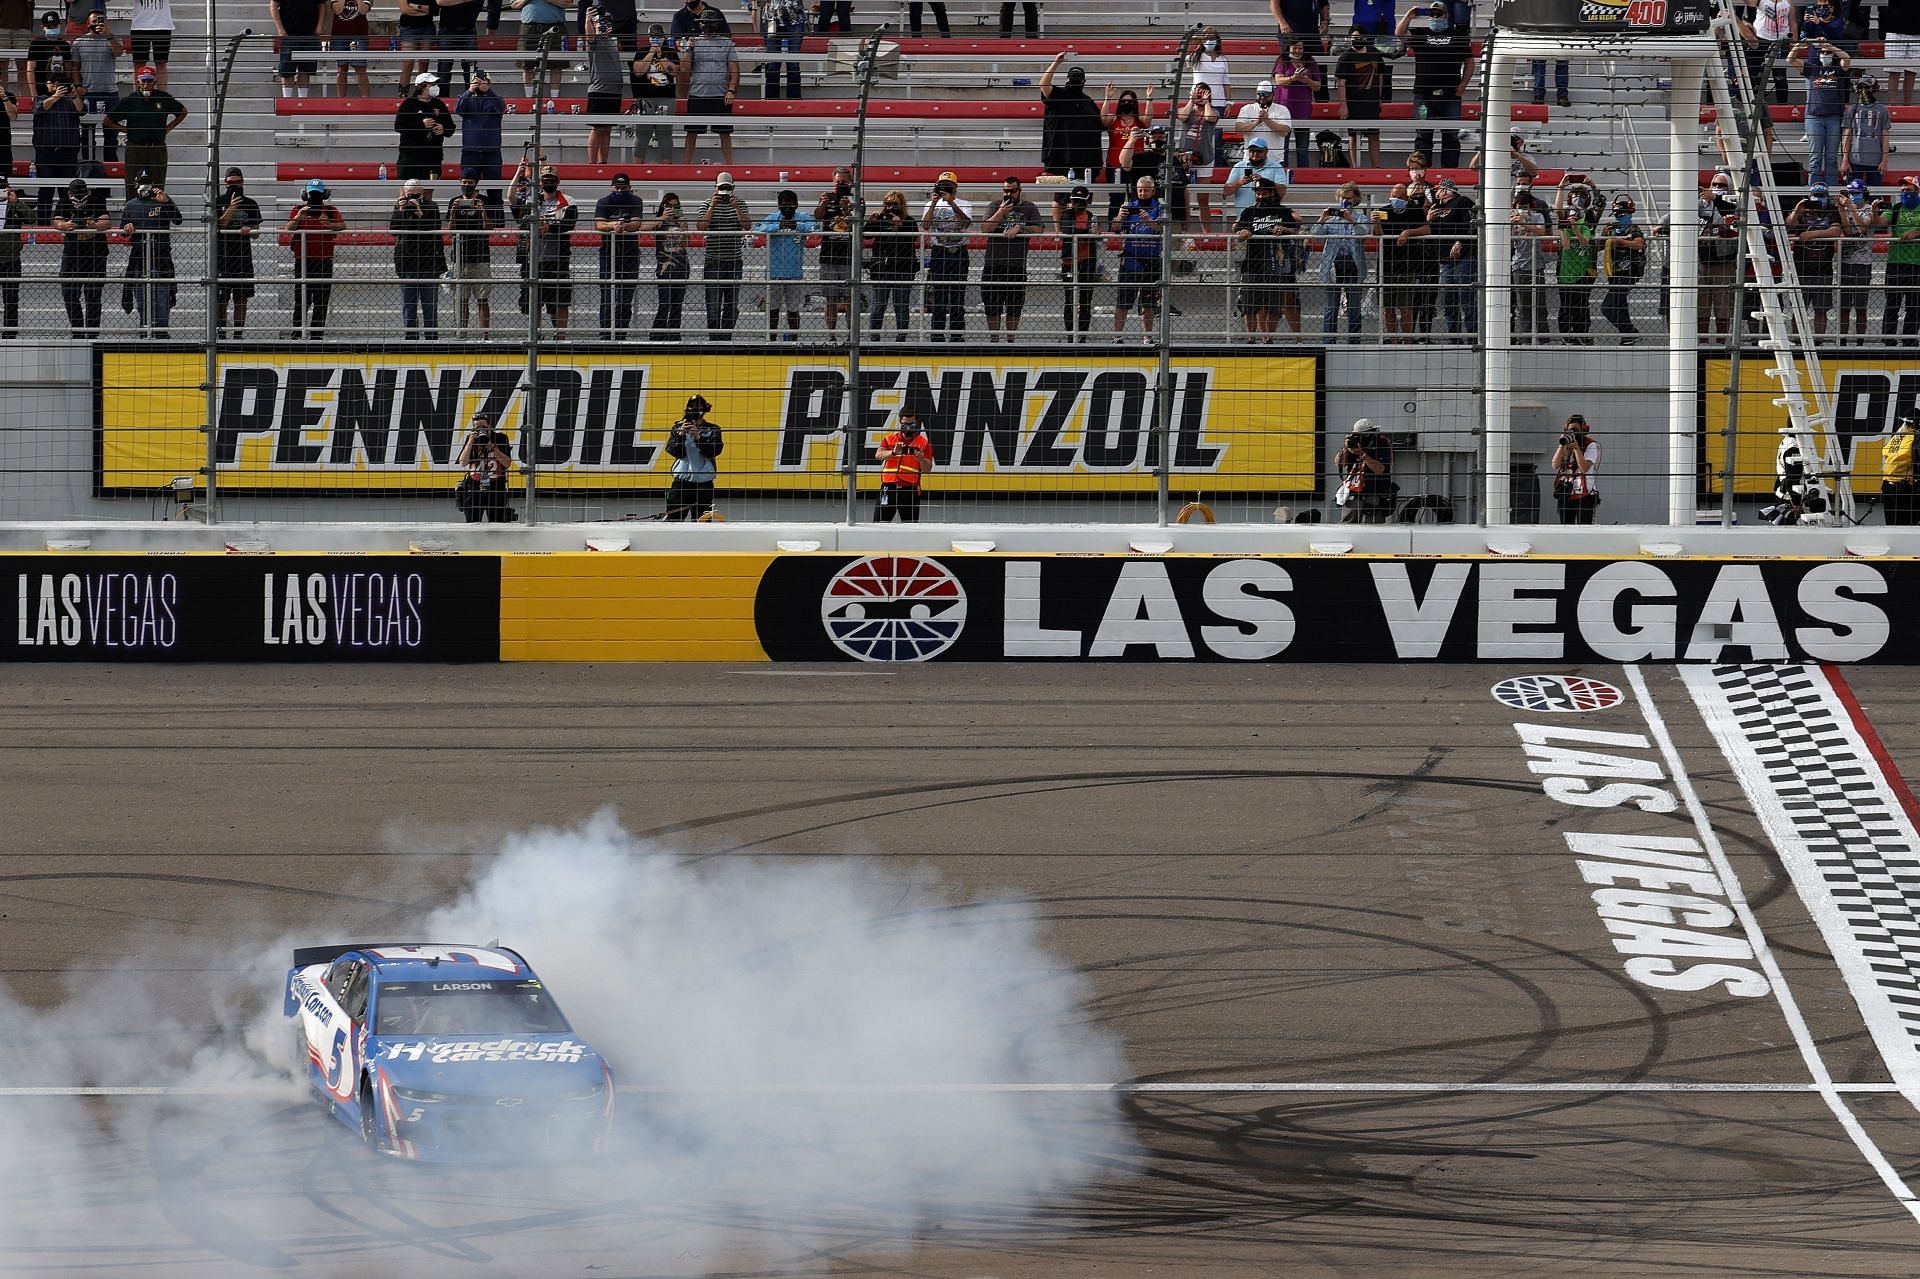 Kyle Larson at the finishing line at Pennzoil 400 presented by Jiffy Lube